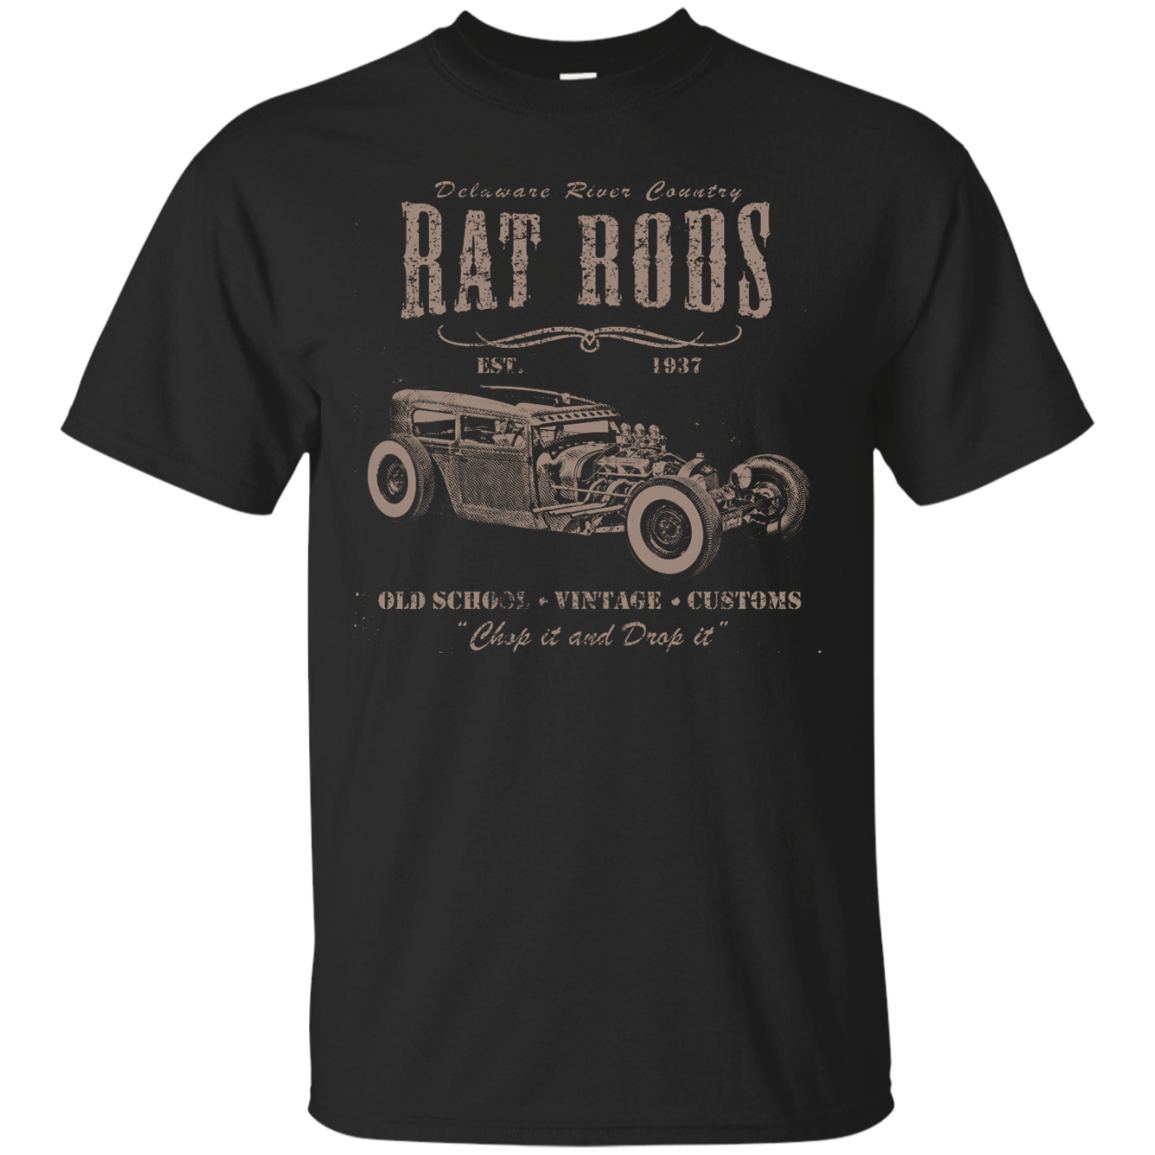 Delaware River Country Rat Rods T-shirt